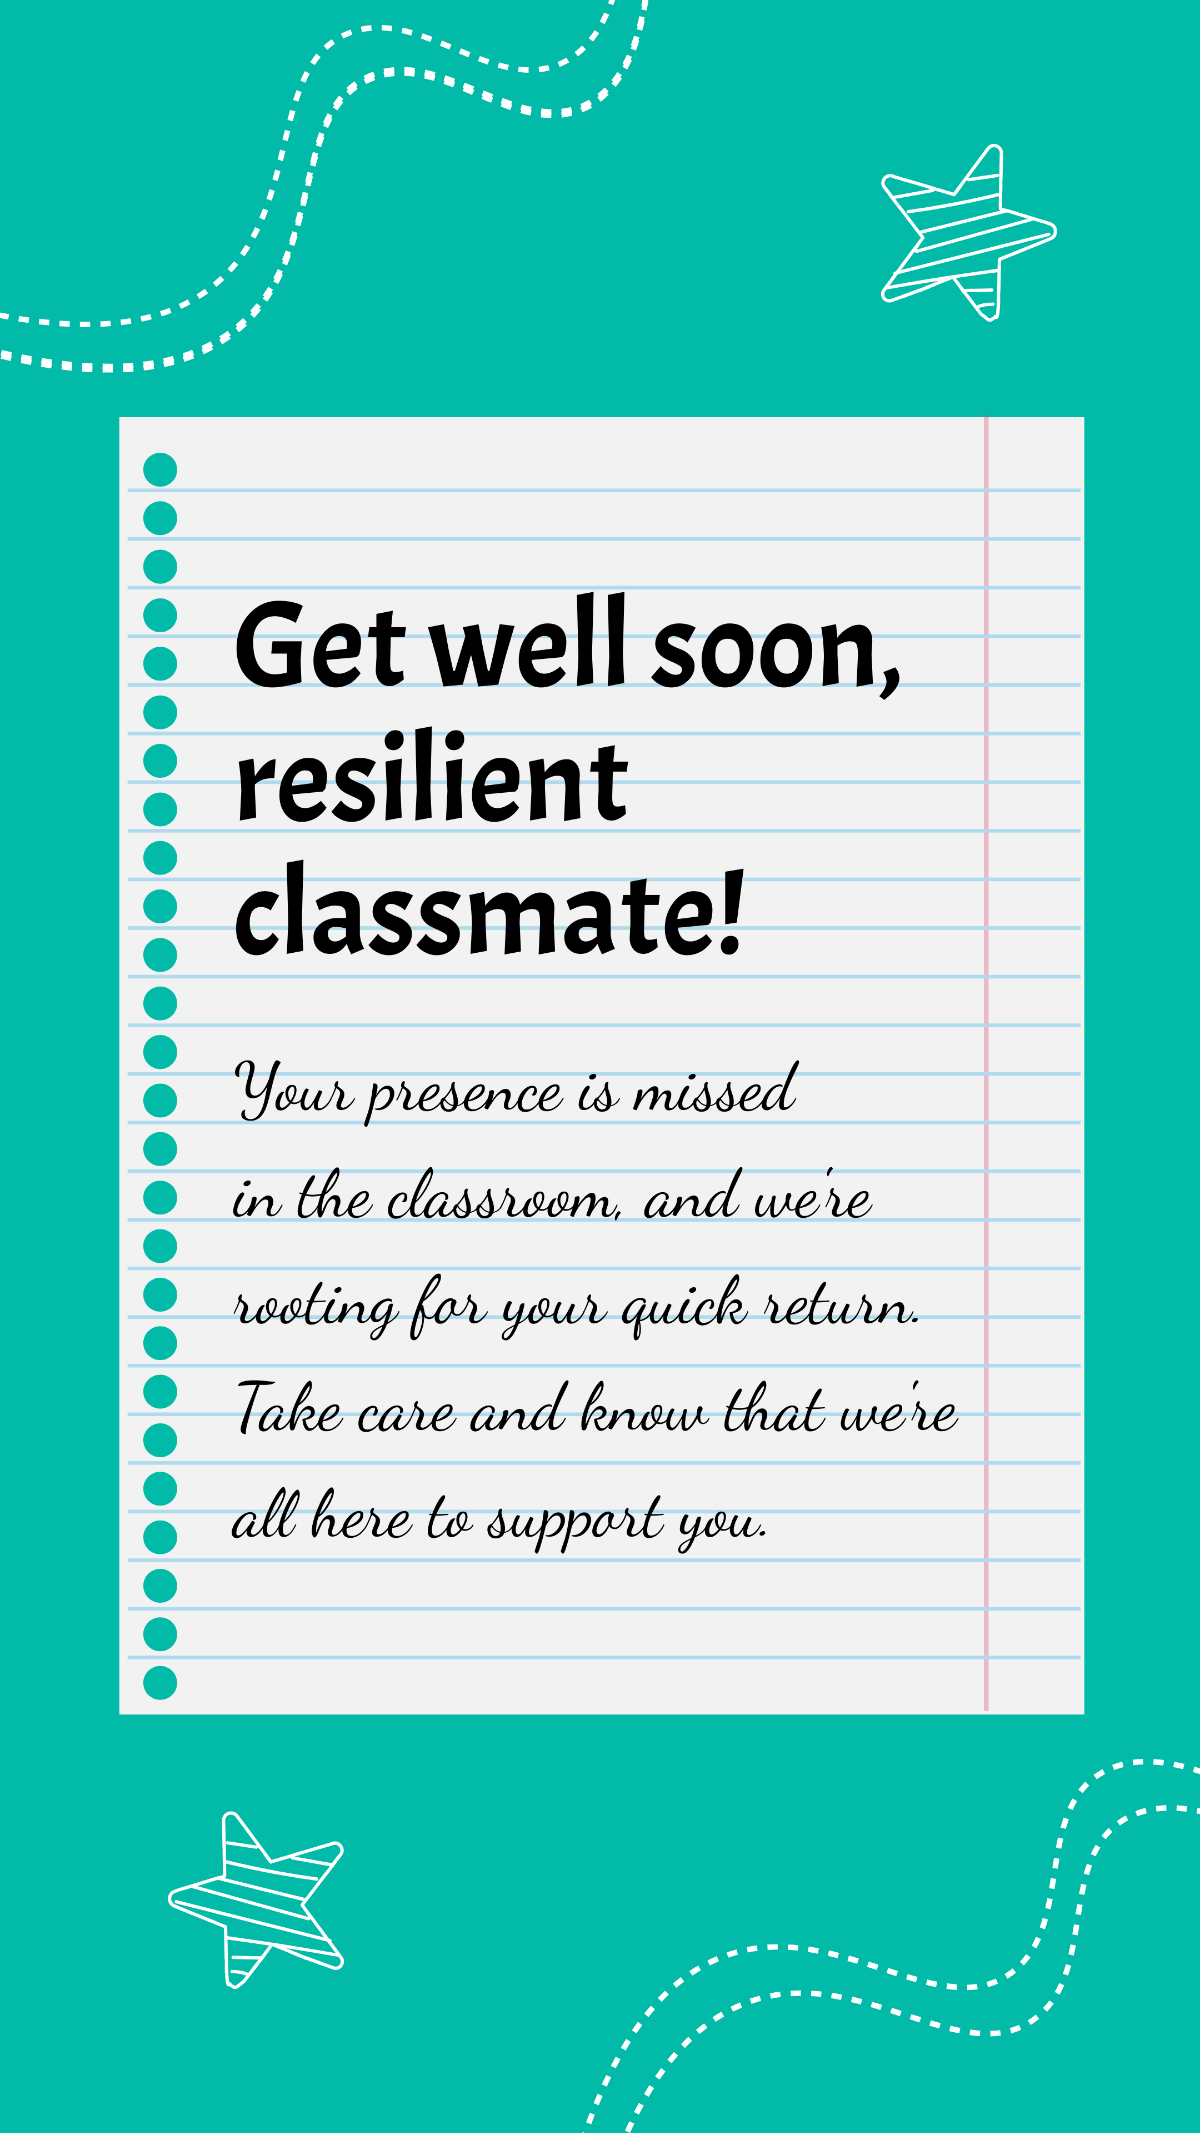 Get Well Soon Message For Classmate